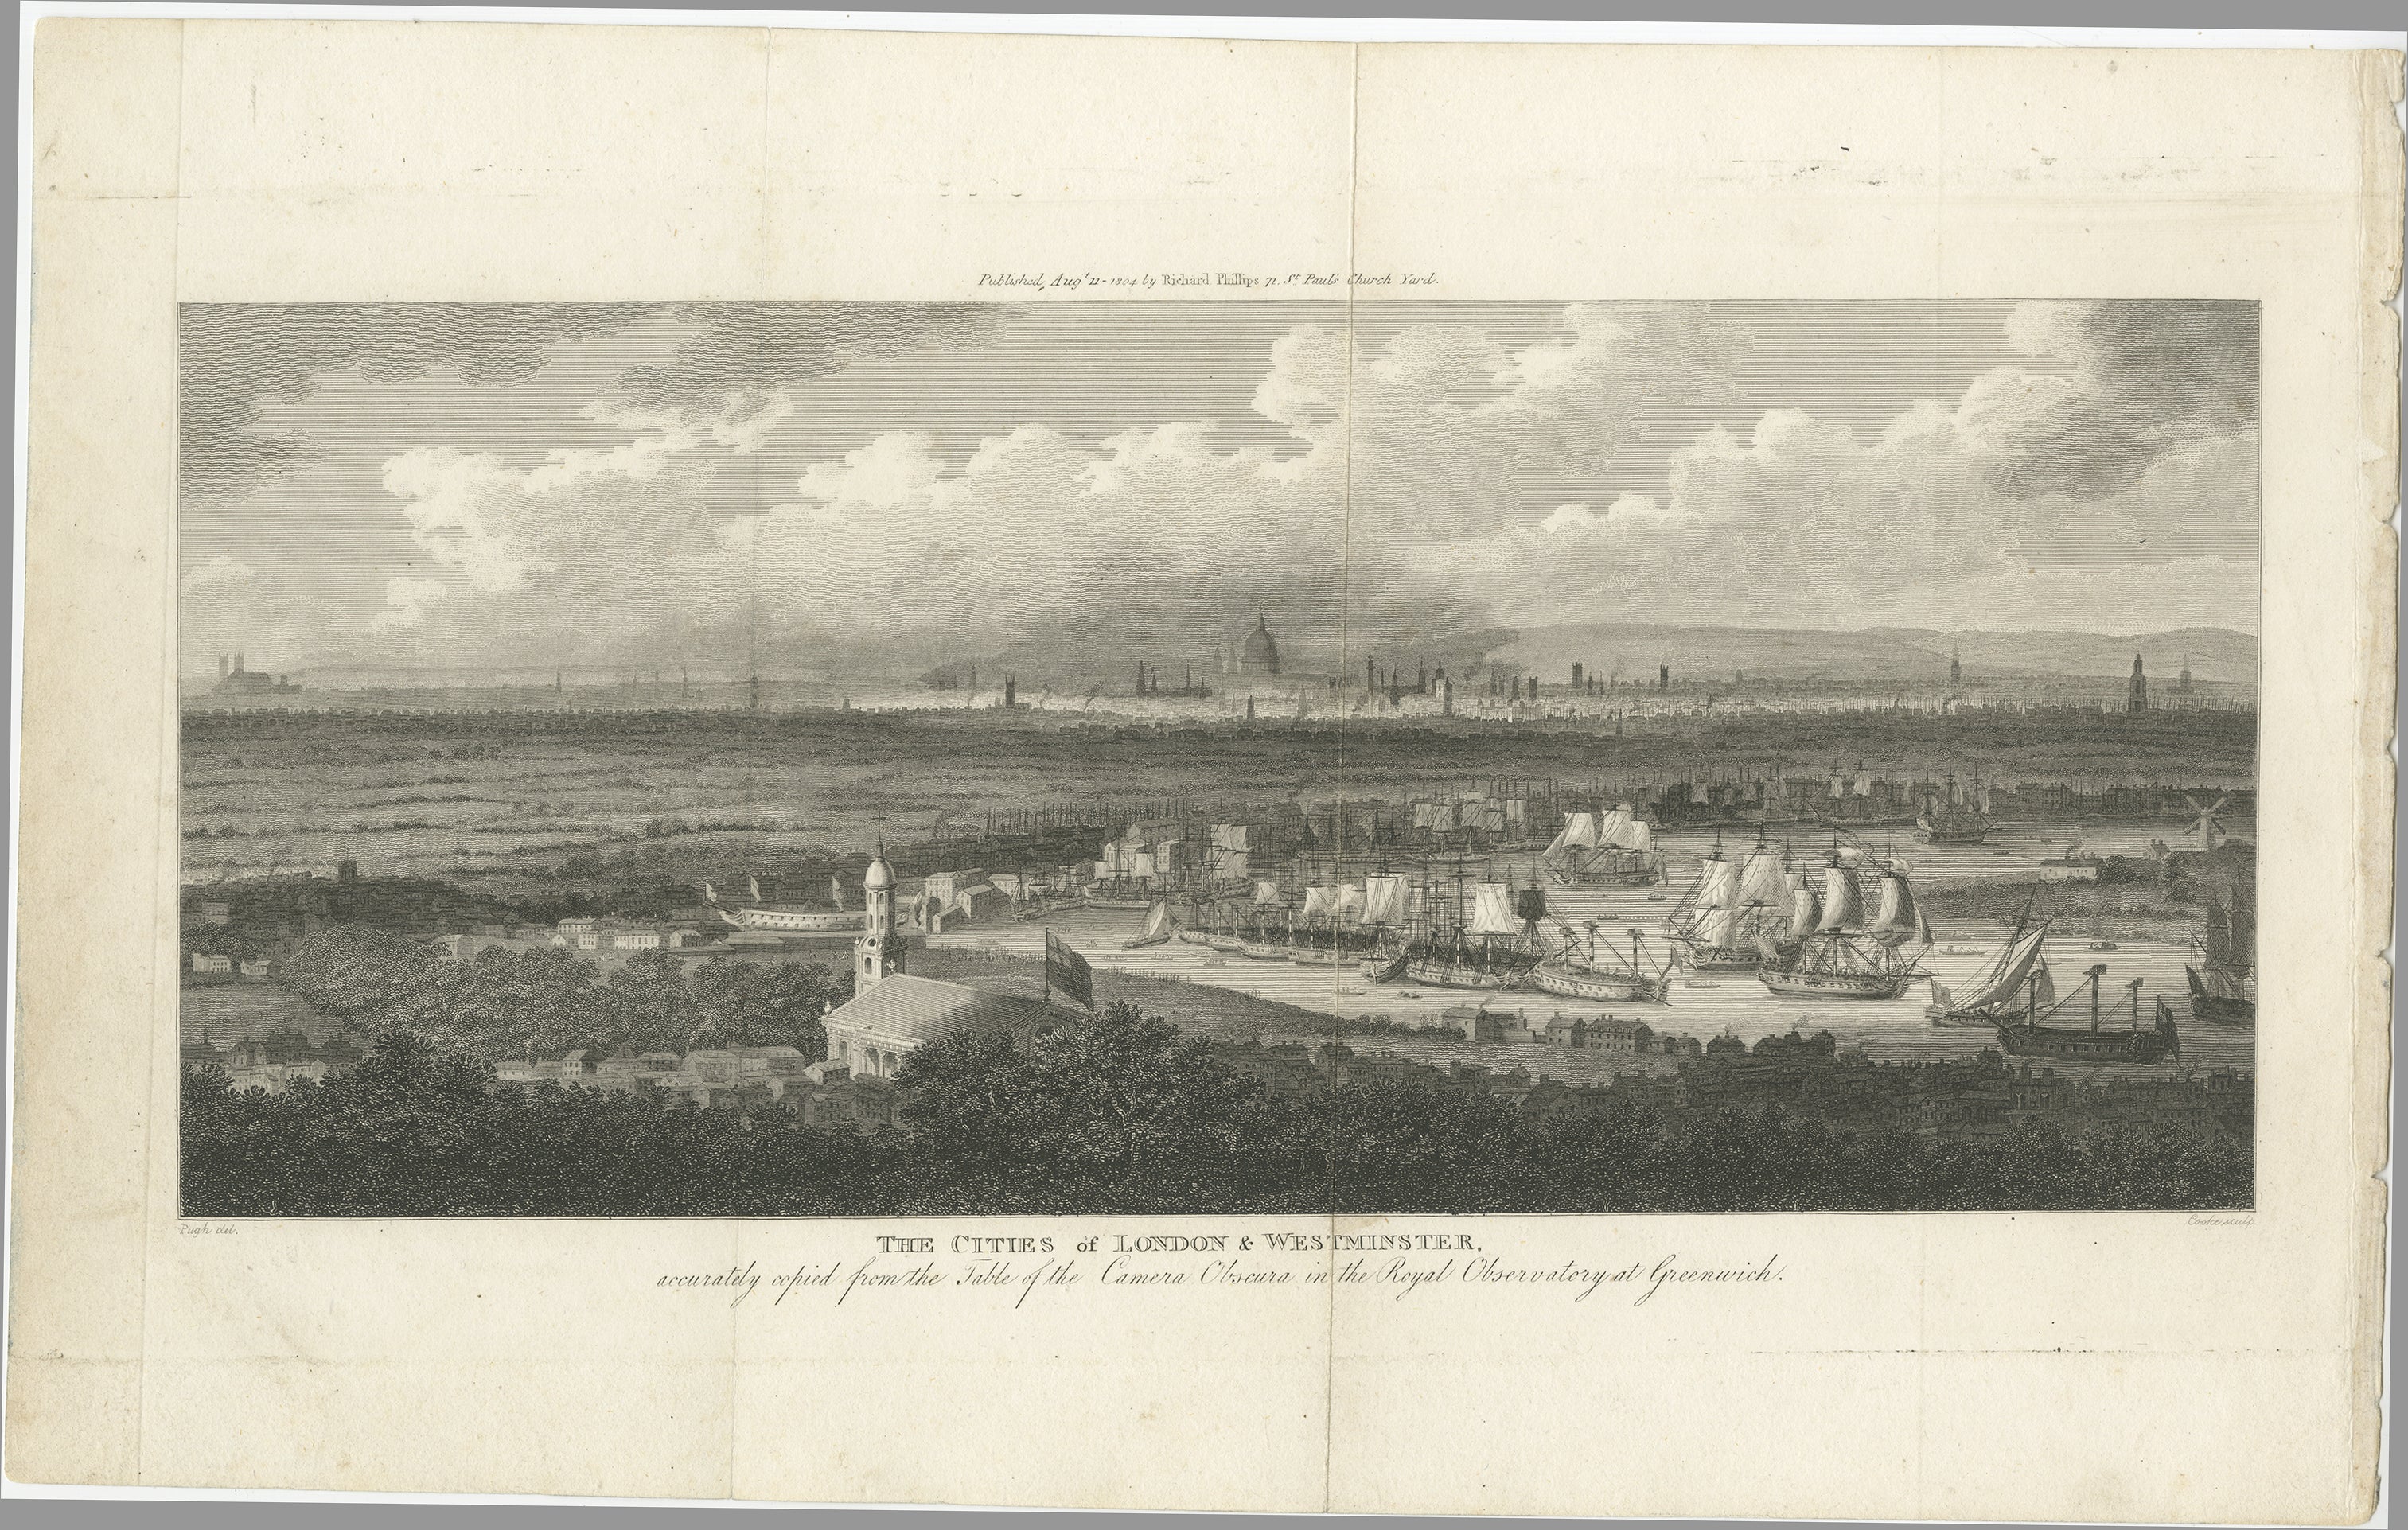 Title: The Cities of London & Westminster, accurately copied from the table of the Camera Obscura in the Royal Observatory at Greenwich

This is a rare plate from a serie of 22 landmarks taken from Modern London, published in 1804 by Richard